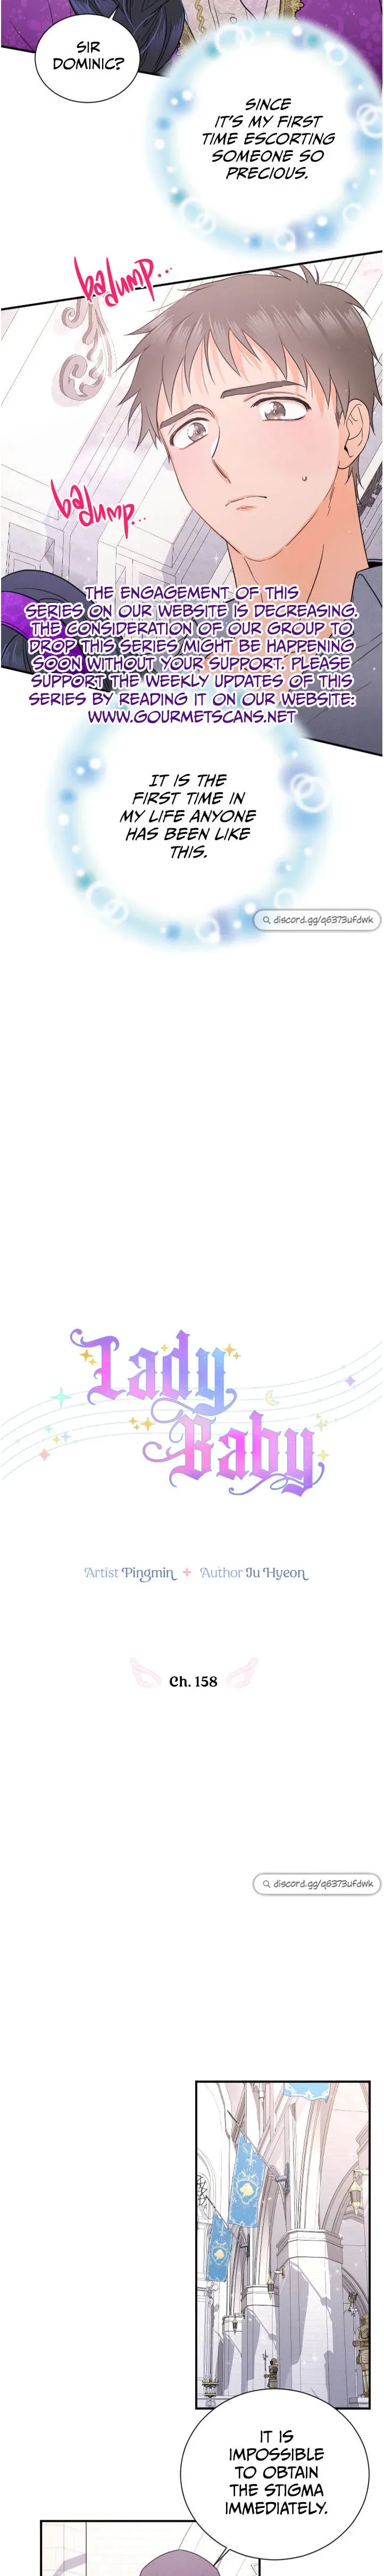 Lady Baby - Page 3